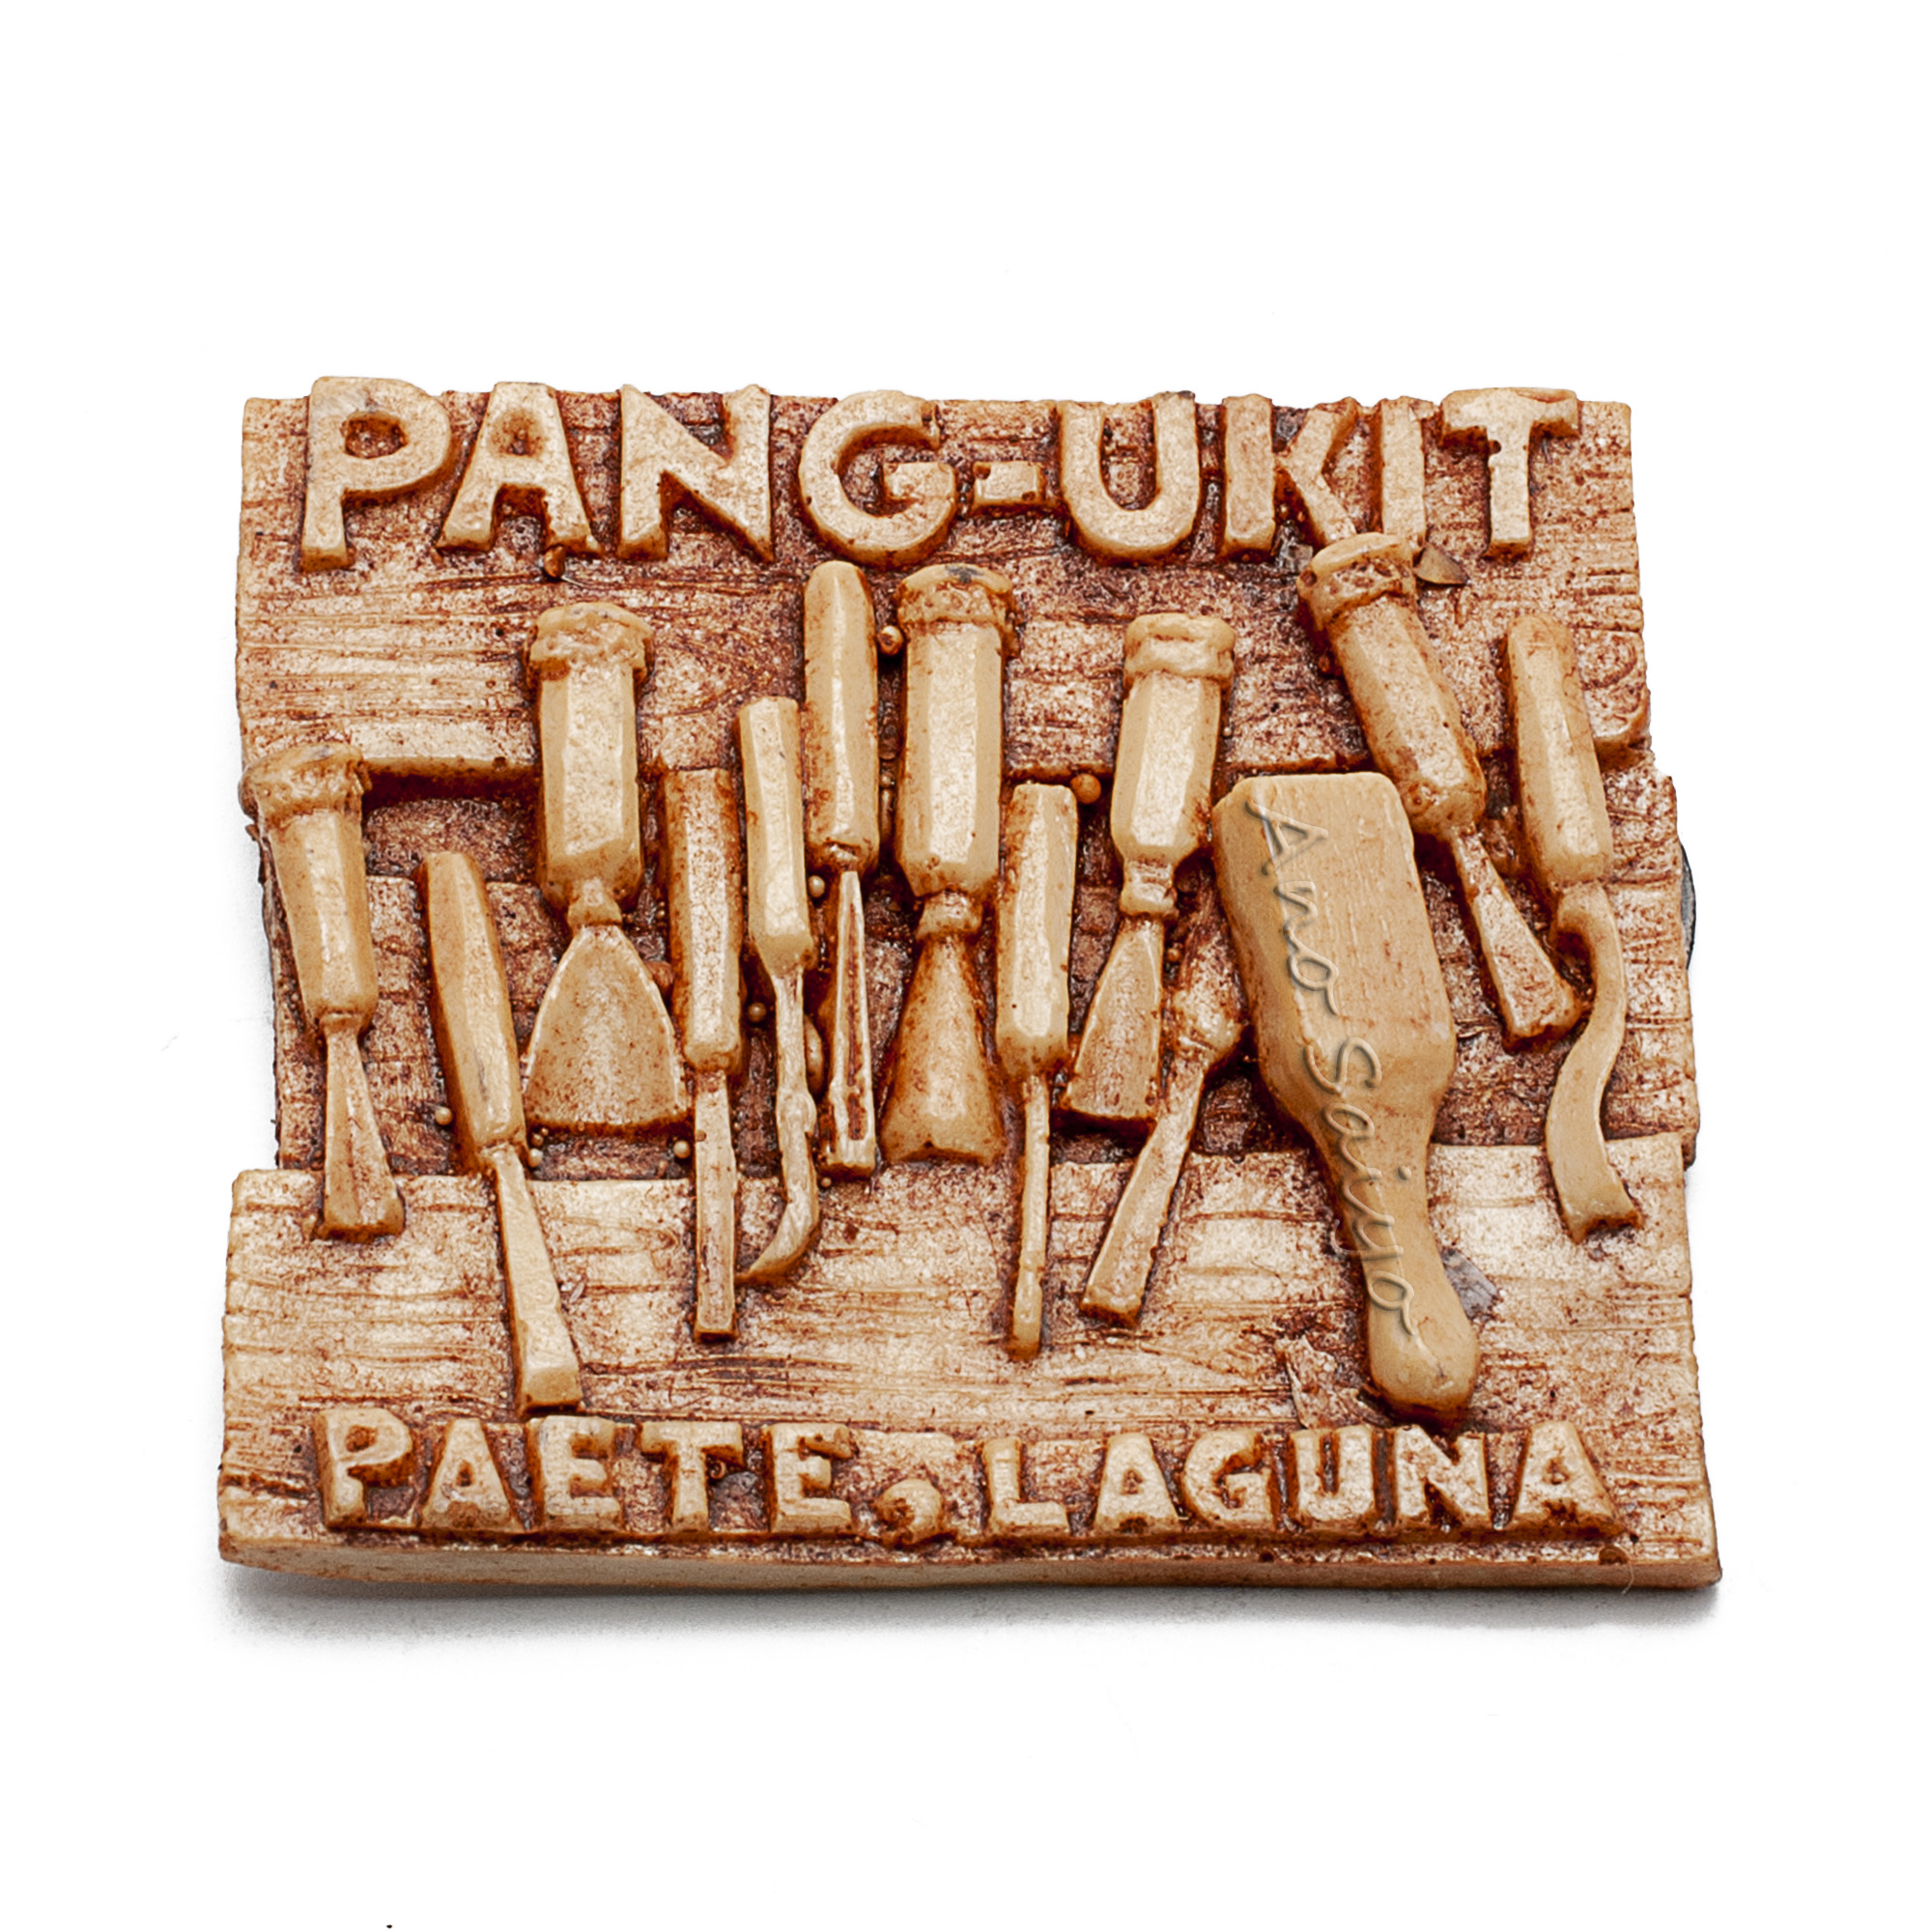 Paete Laguna Wood Carving Stores - Wood carving hd images